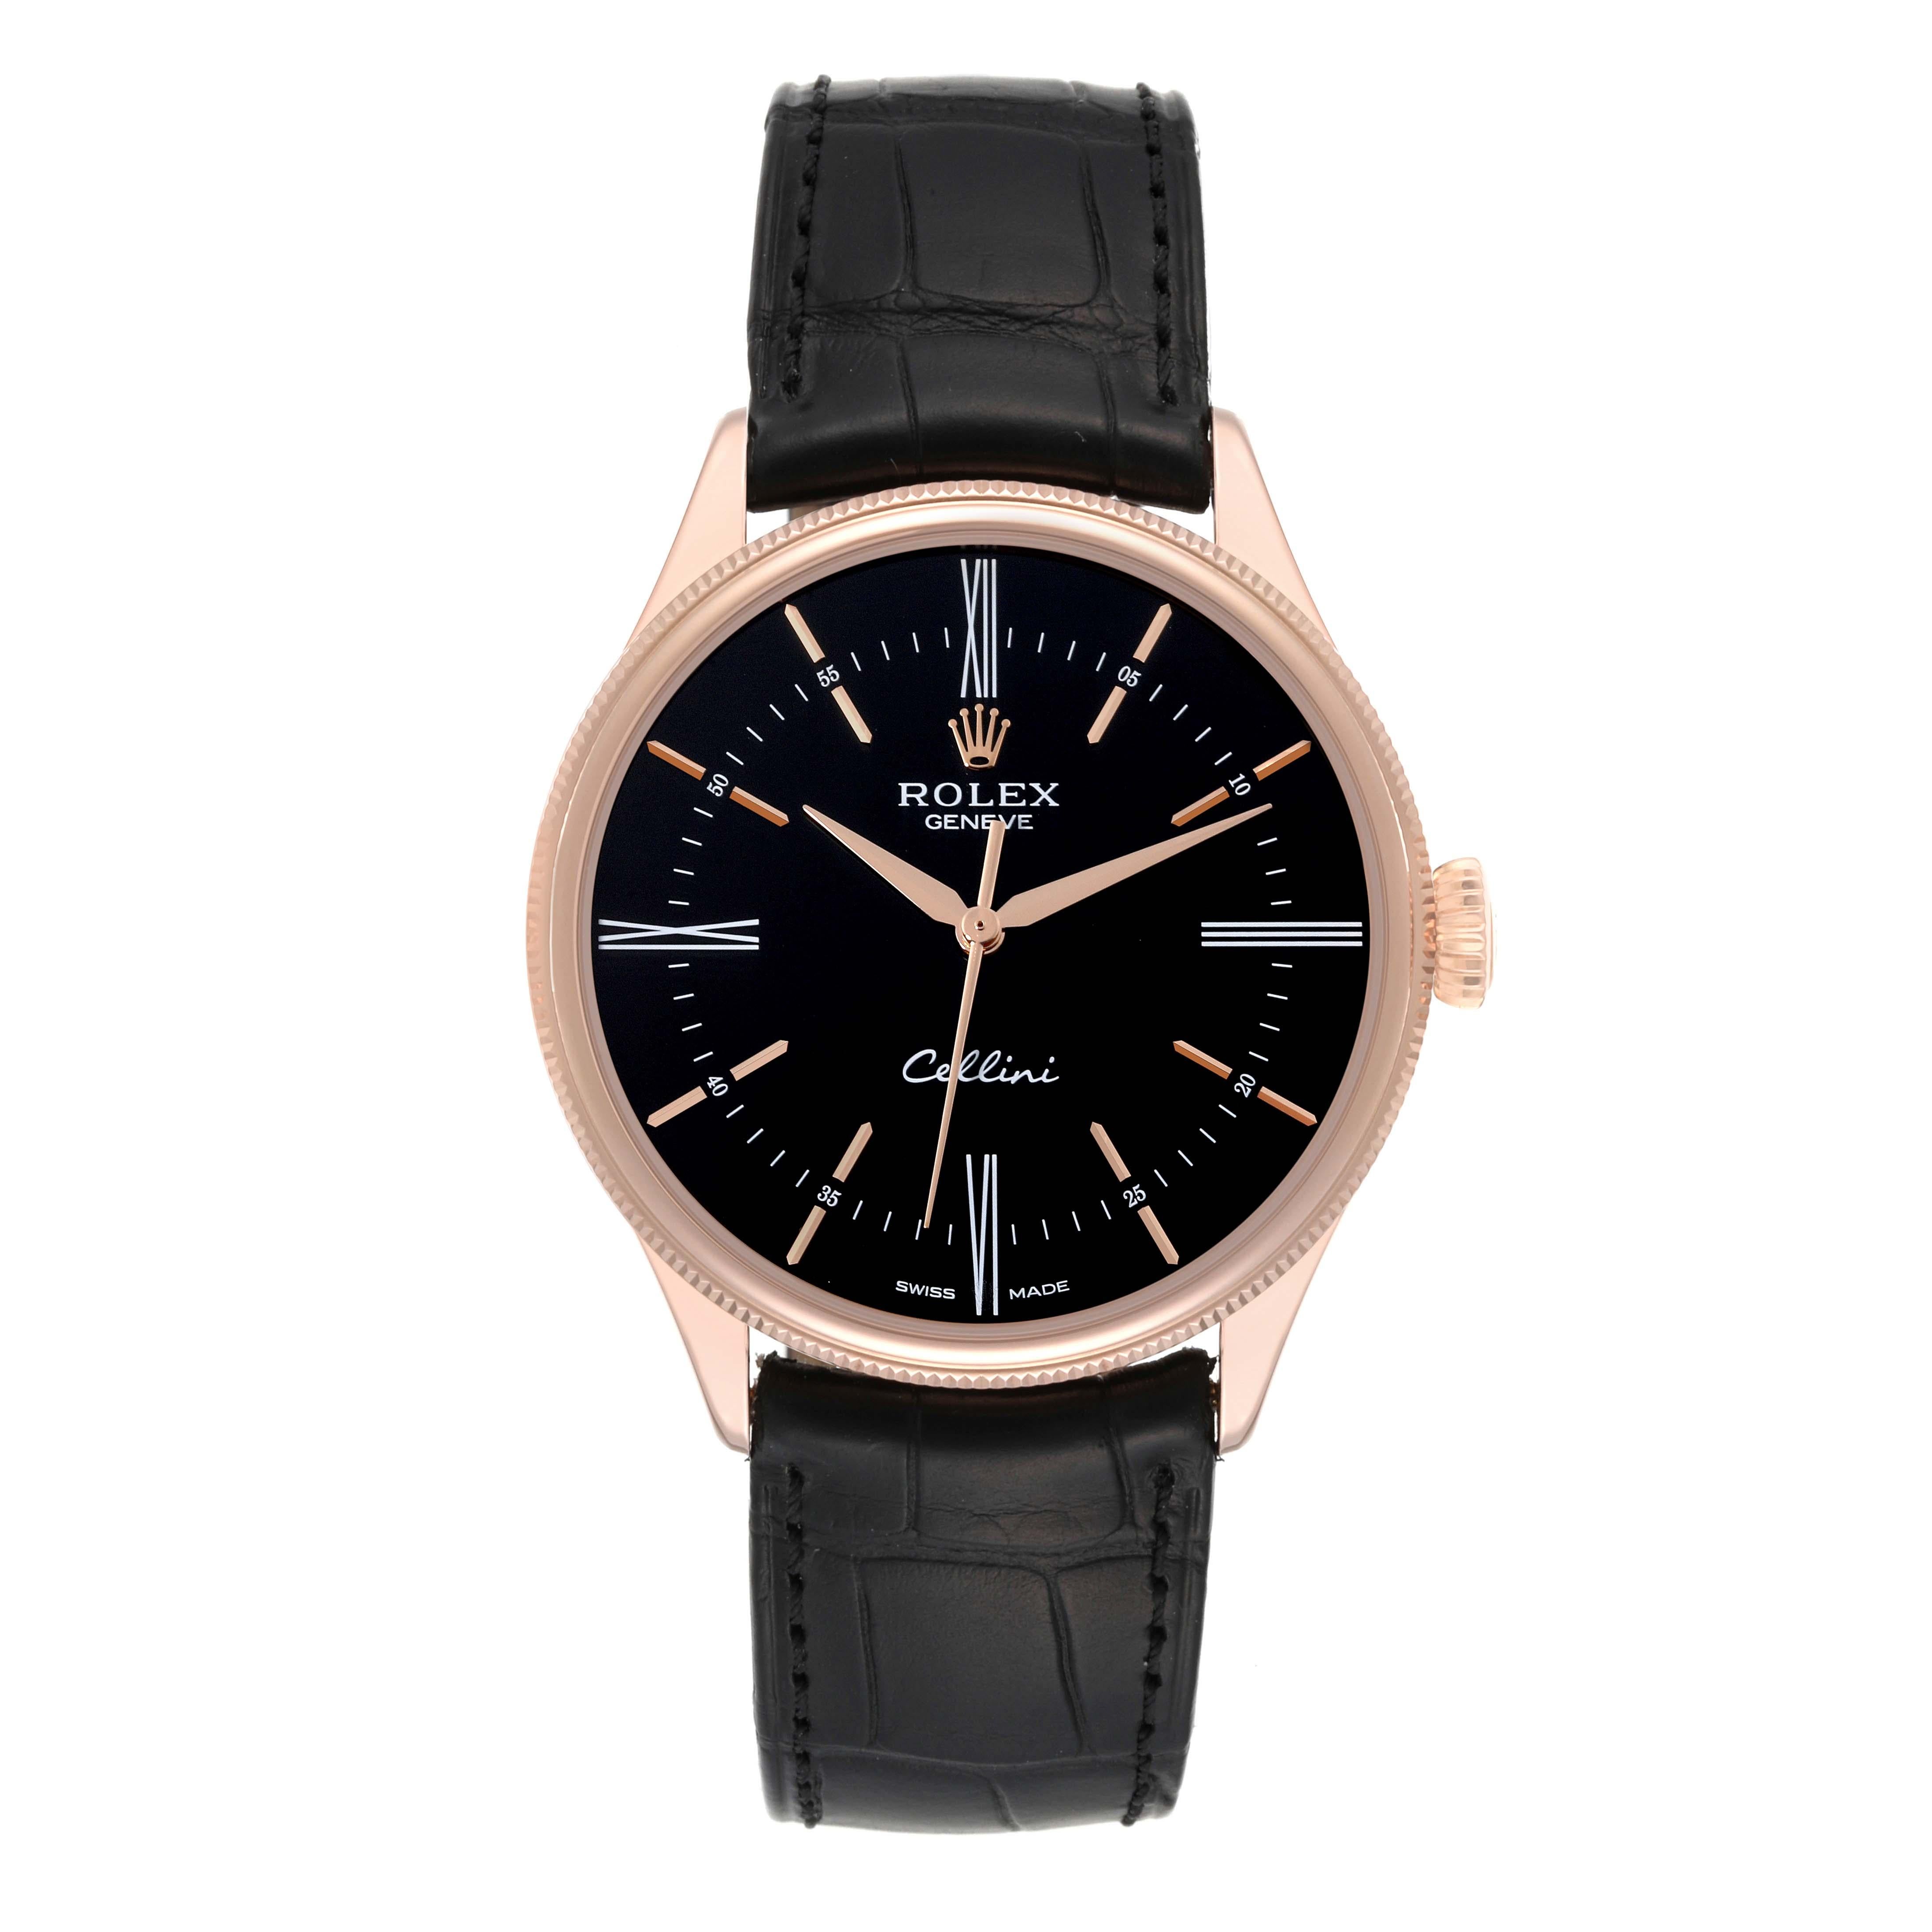 Rolex Cellini Time Rose Gold Black Dial Mens Watch 50505 Box Card. Automatic self-winding movement. Officially certified Swiss chronometer (COSC). Paramagnetic blue Parachrom hairspring. Bidirectional self-winding via Perpetual rotor. 18K rose gold